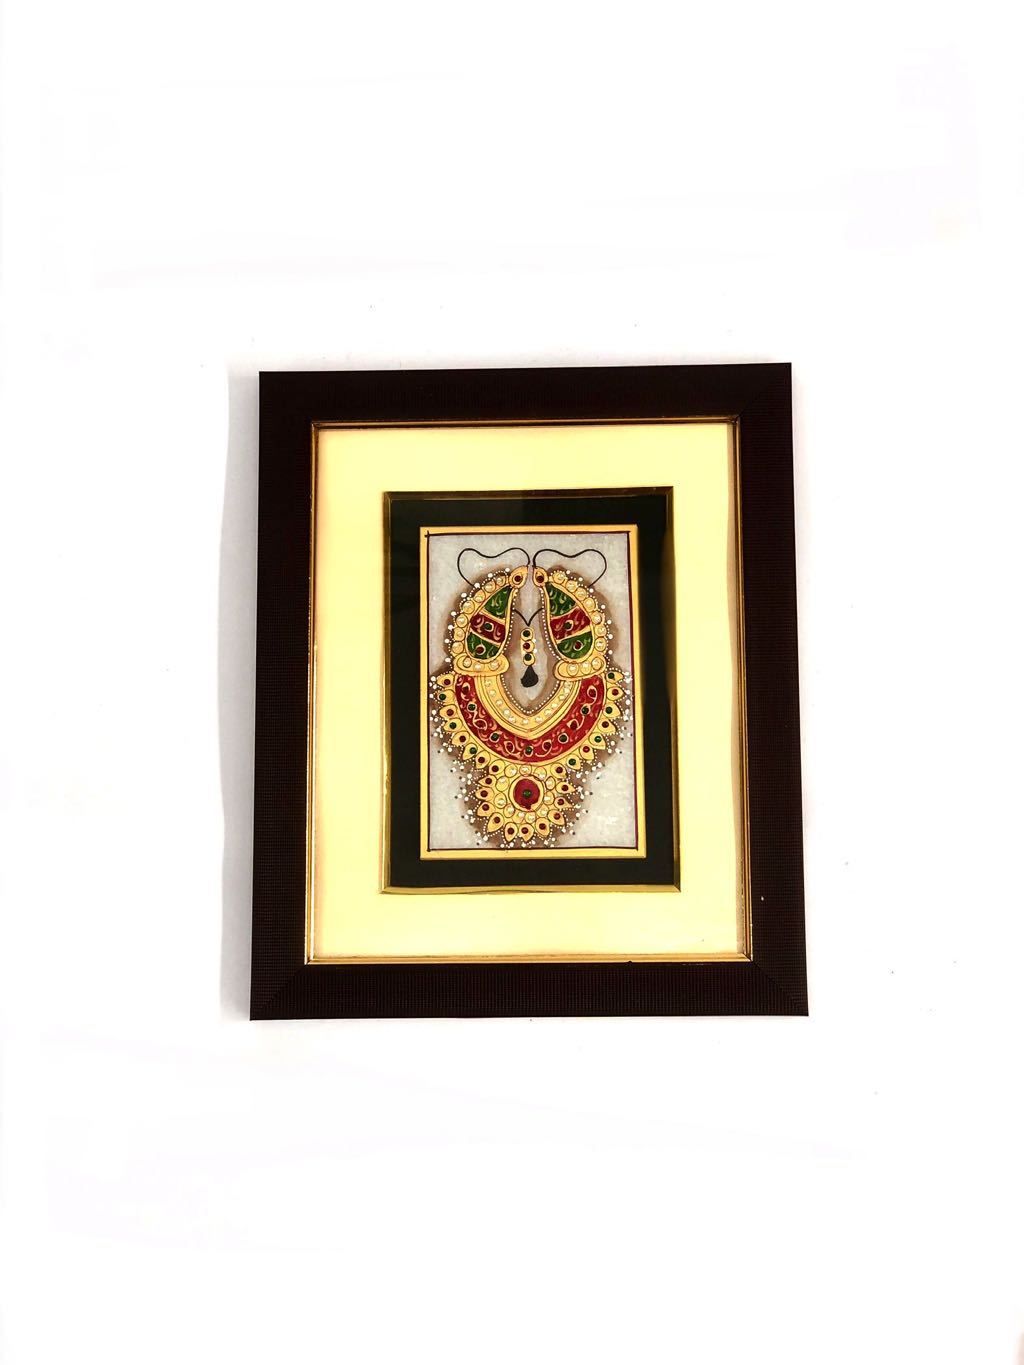 Ornament Style Work On Marble Tile In Wooden Frame Hanging Tamrapatra